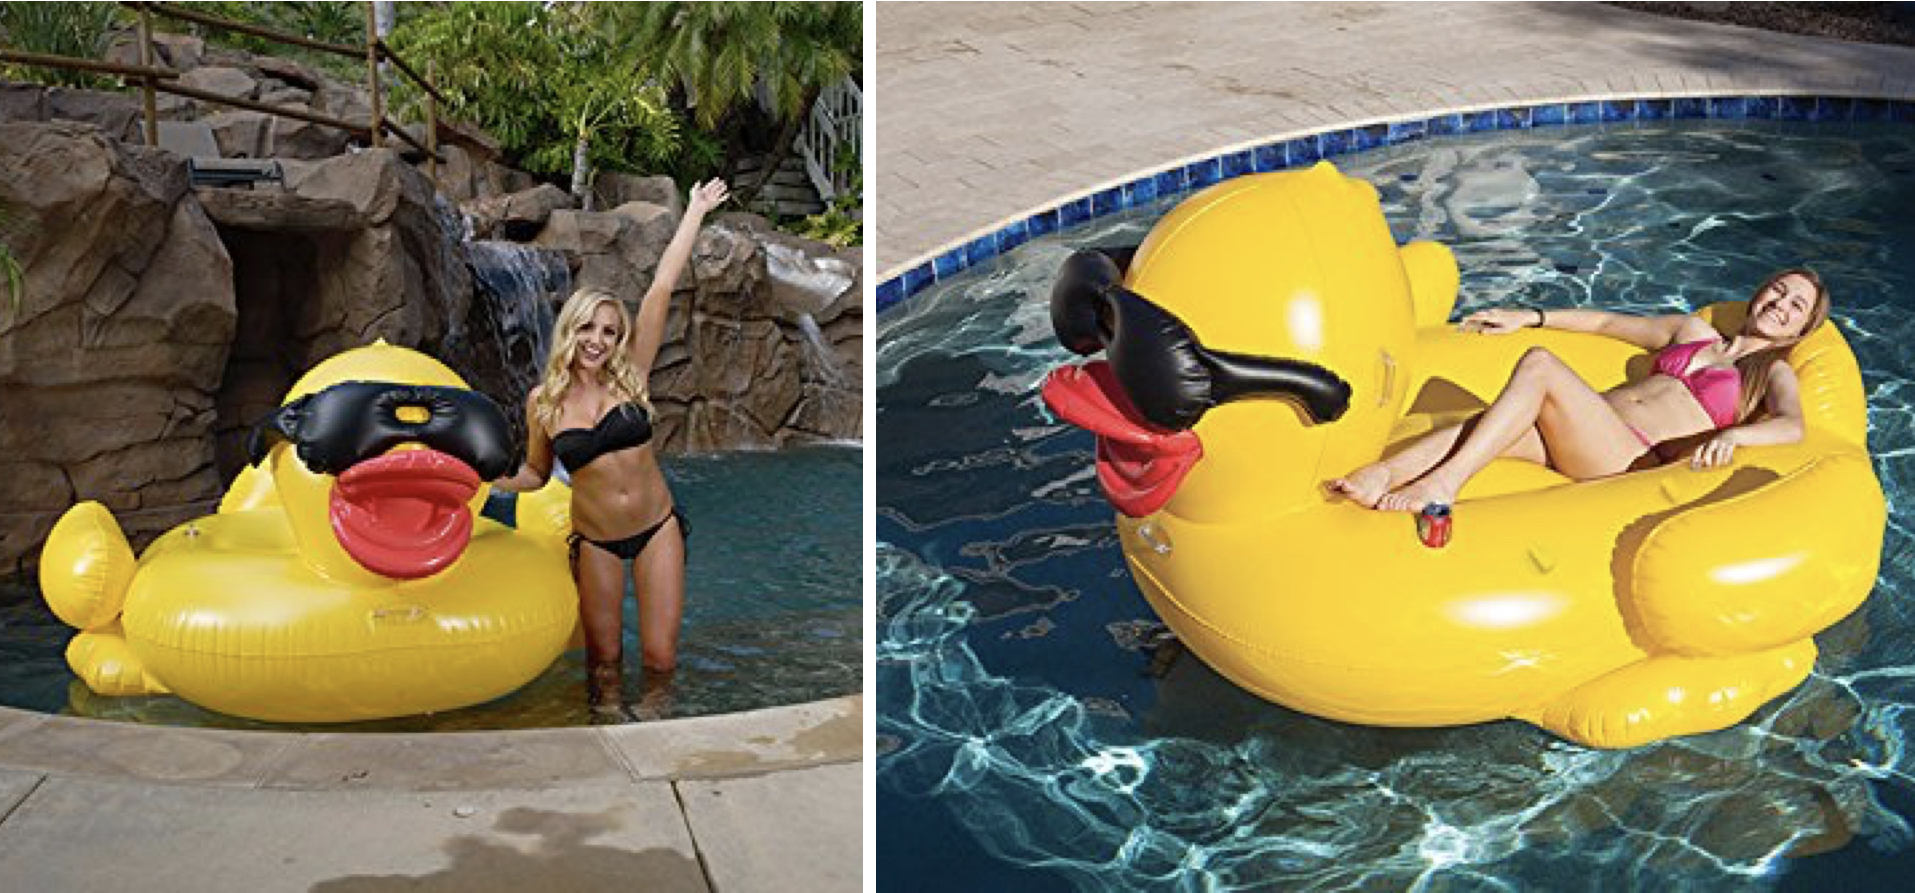 Derby Duck Pool Float - The most Instagrammable Pool Floats Summer 2017